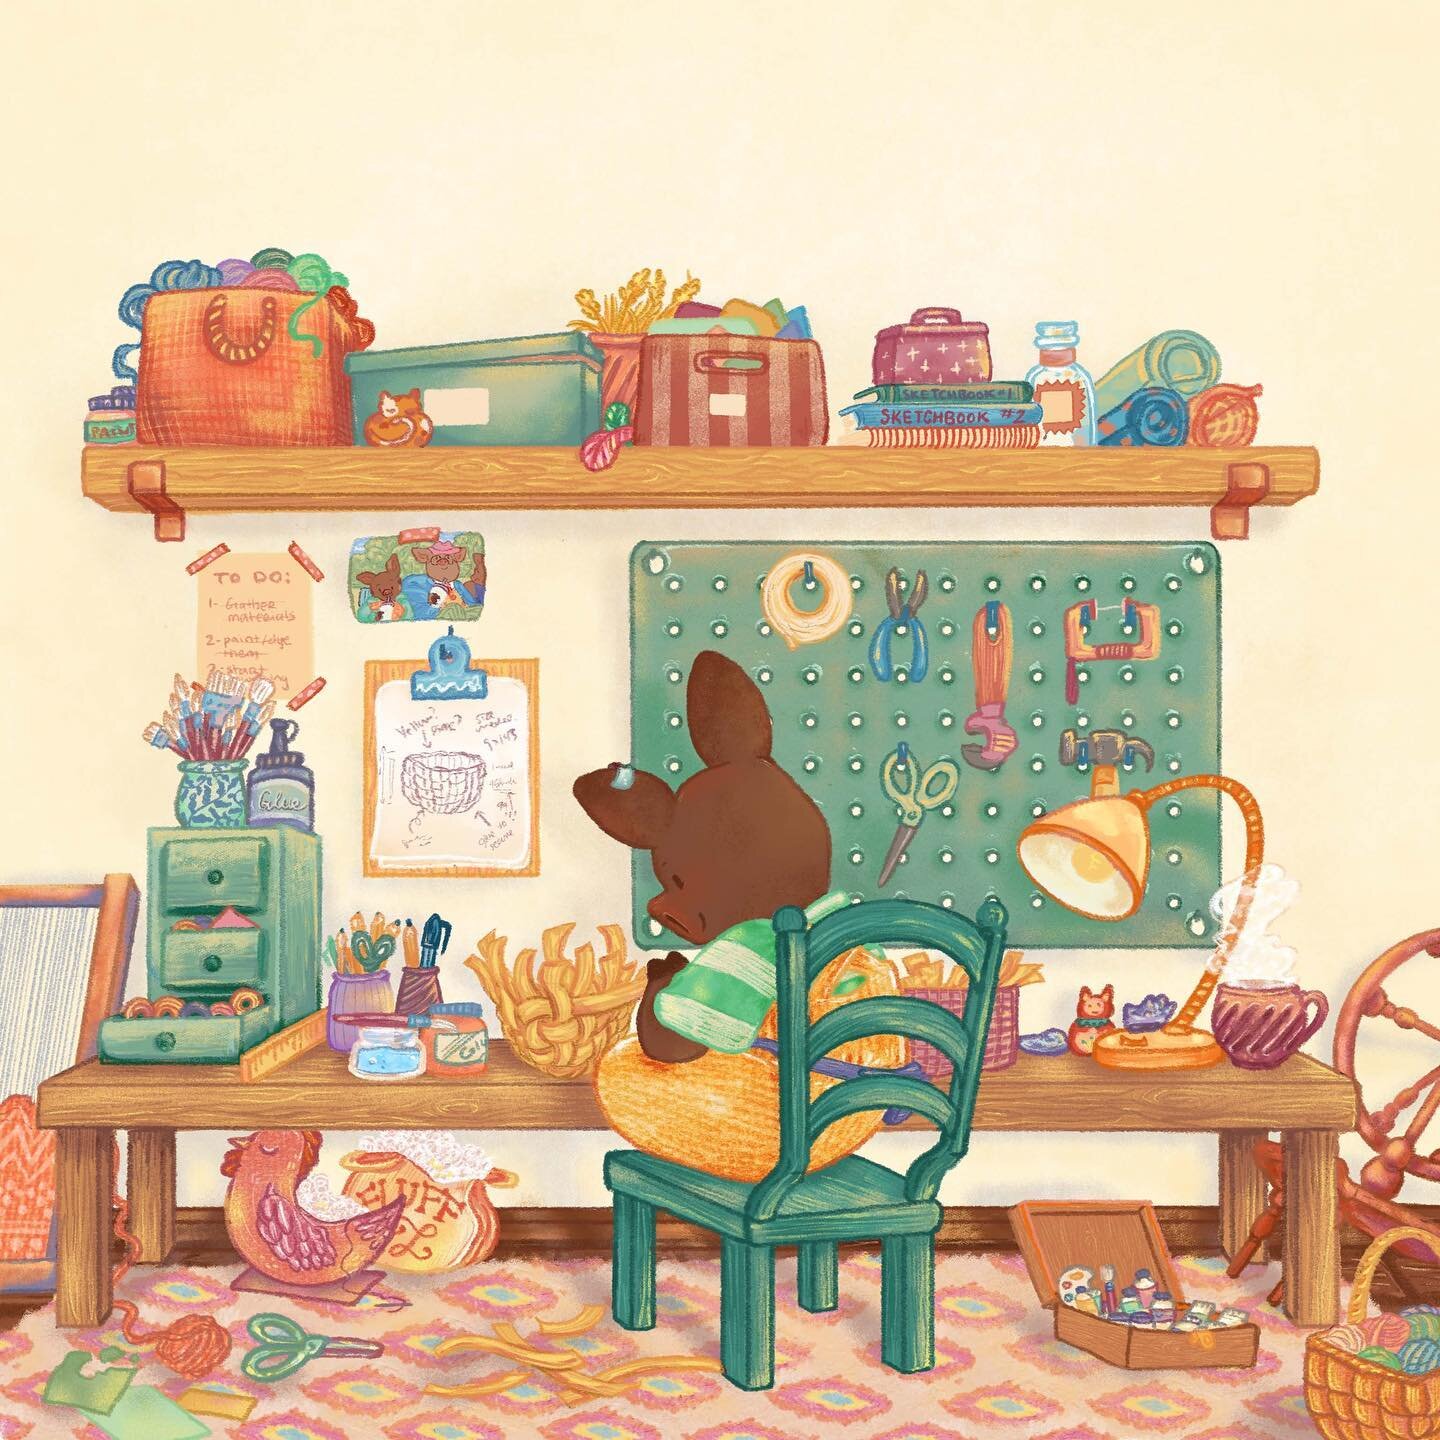 The back cover illustration from &ldquo;Prak Fills The House&rdquo;, which is out now! I loved drawing Prak at her desk, she makes me want to try all of the crafts I&rsquo;ve never done before! 🧶

🏷️ #artistsoninstagram #picturebook #picturebookart